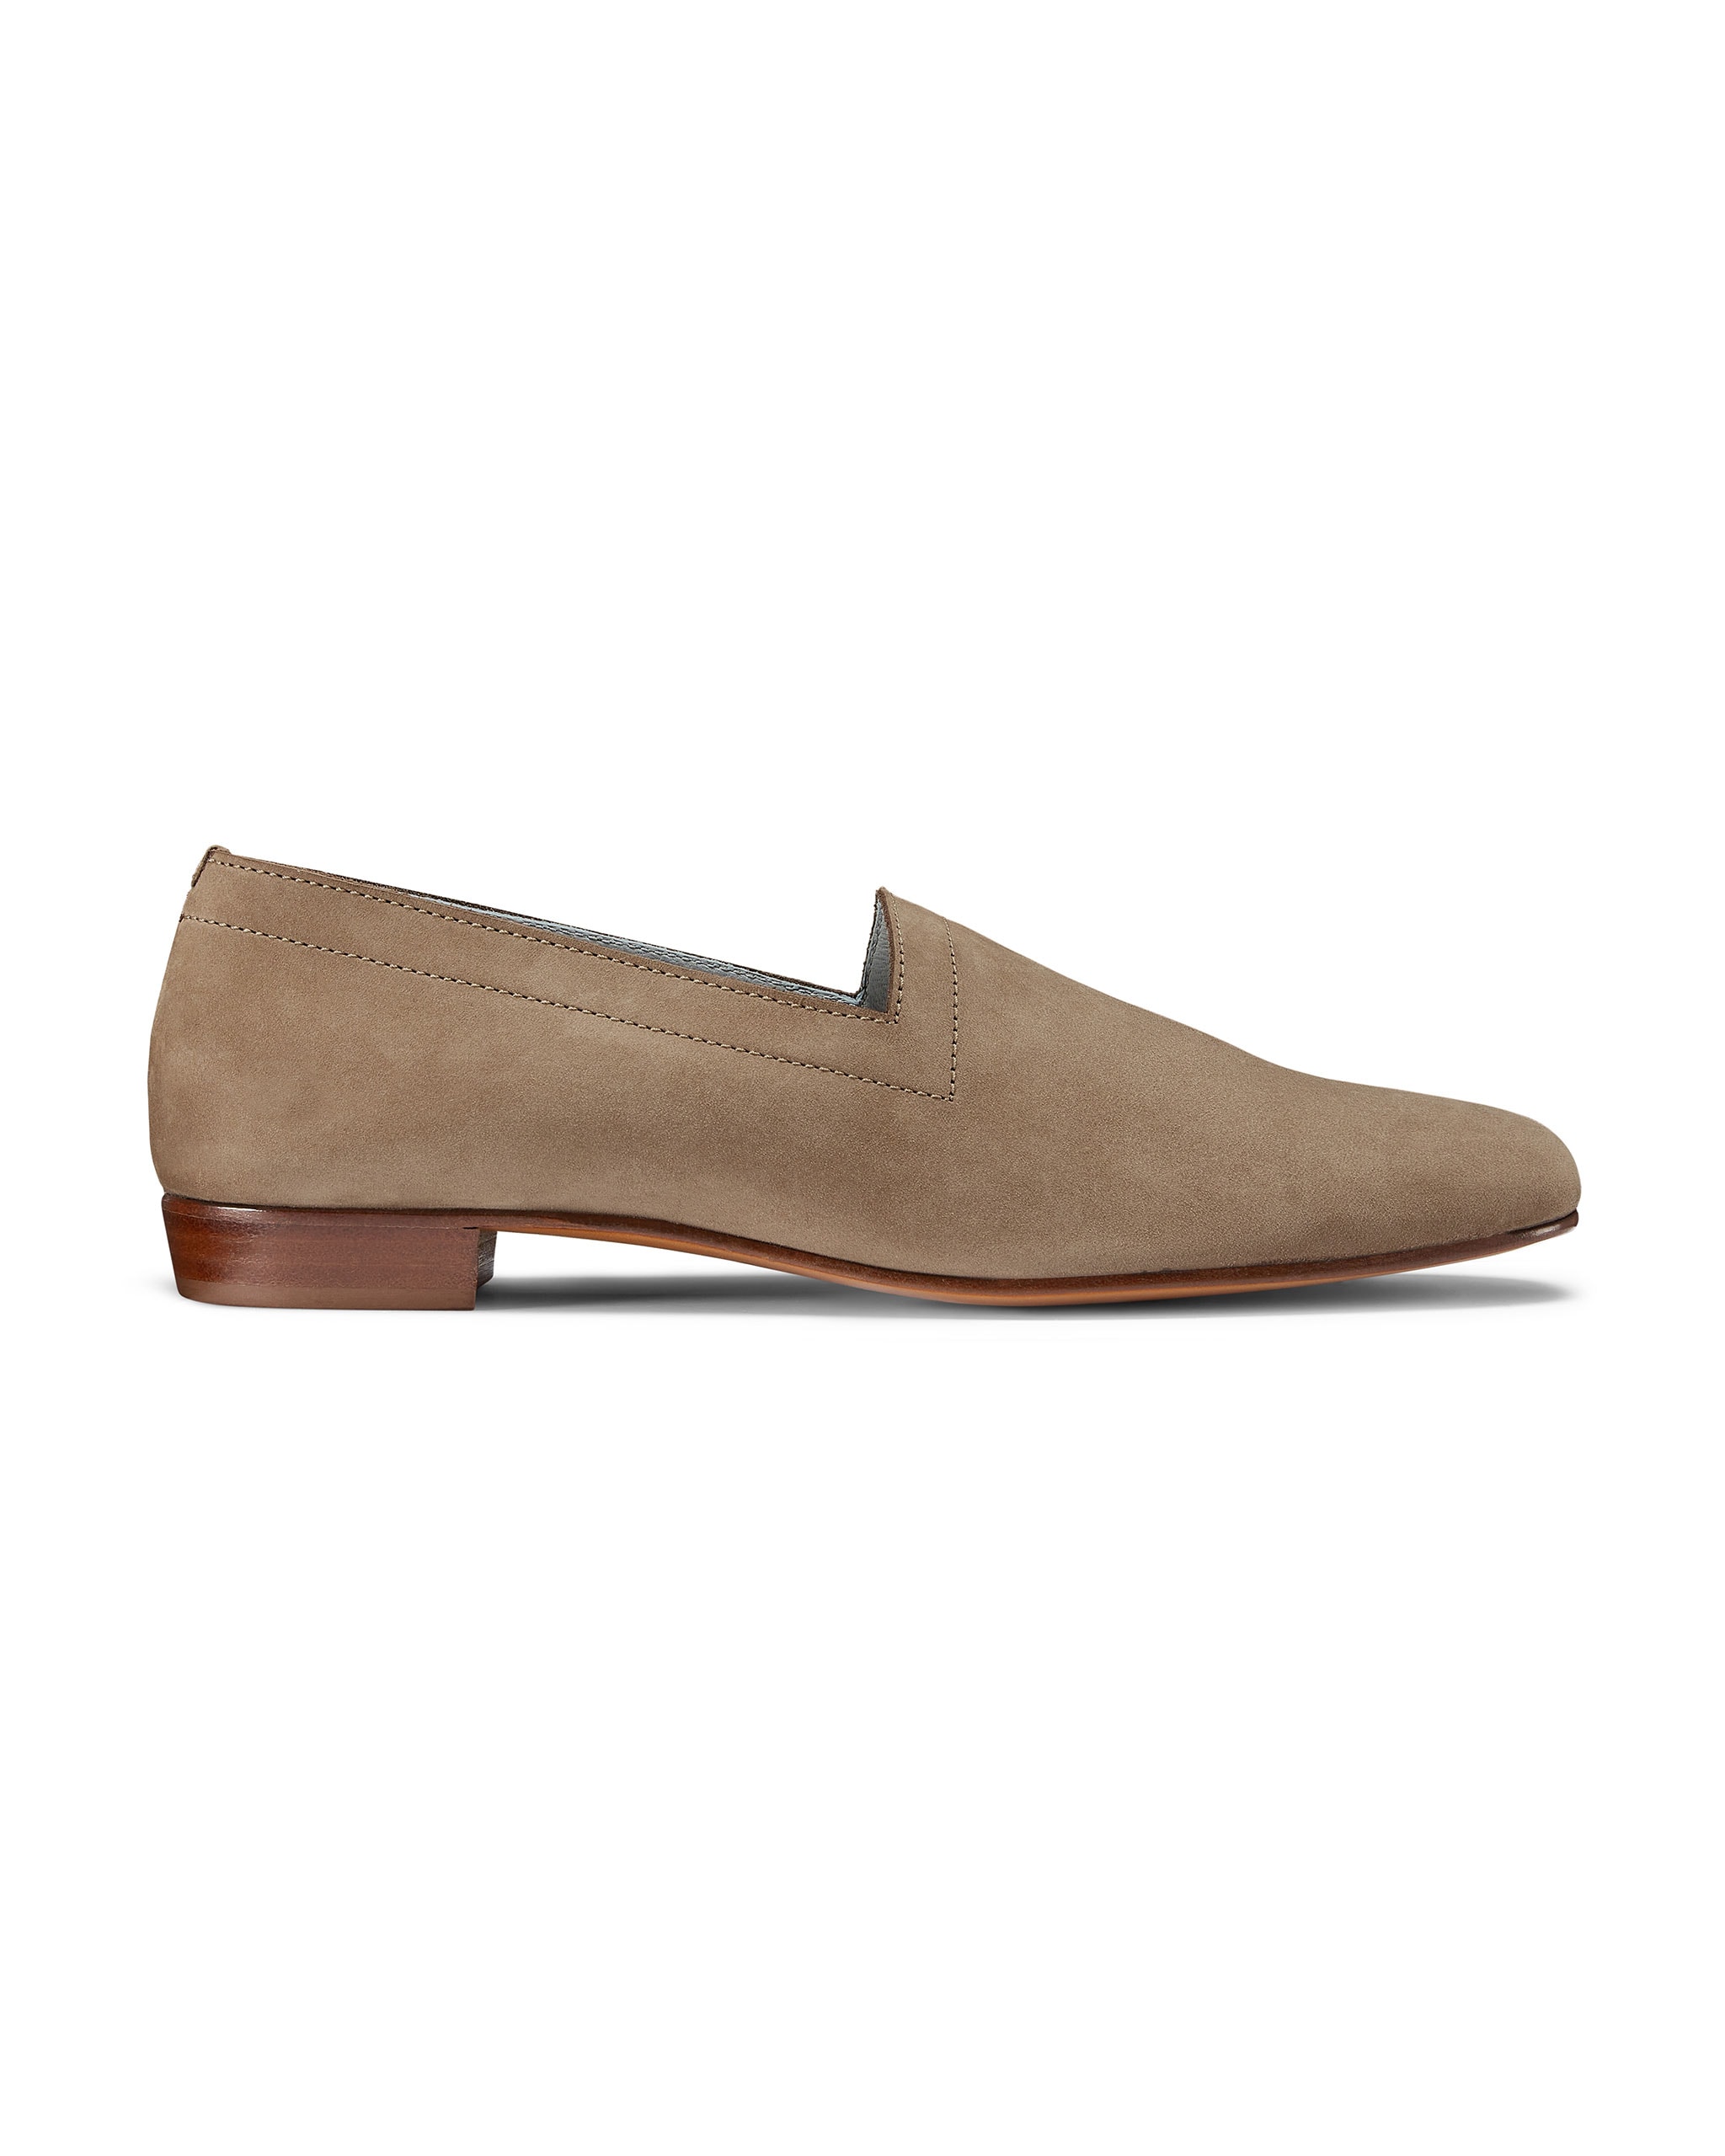 Ops&Ops No17 Mushroom nubuck loafers, side view